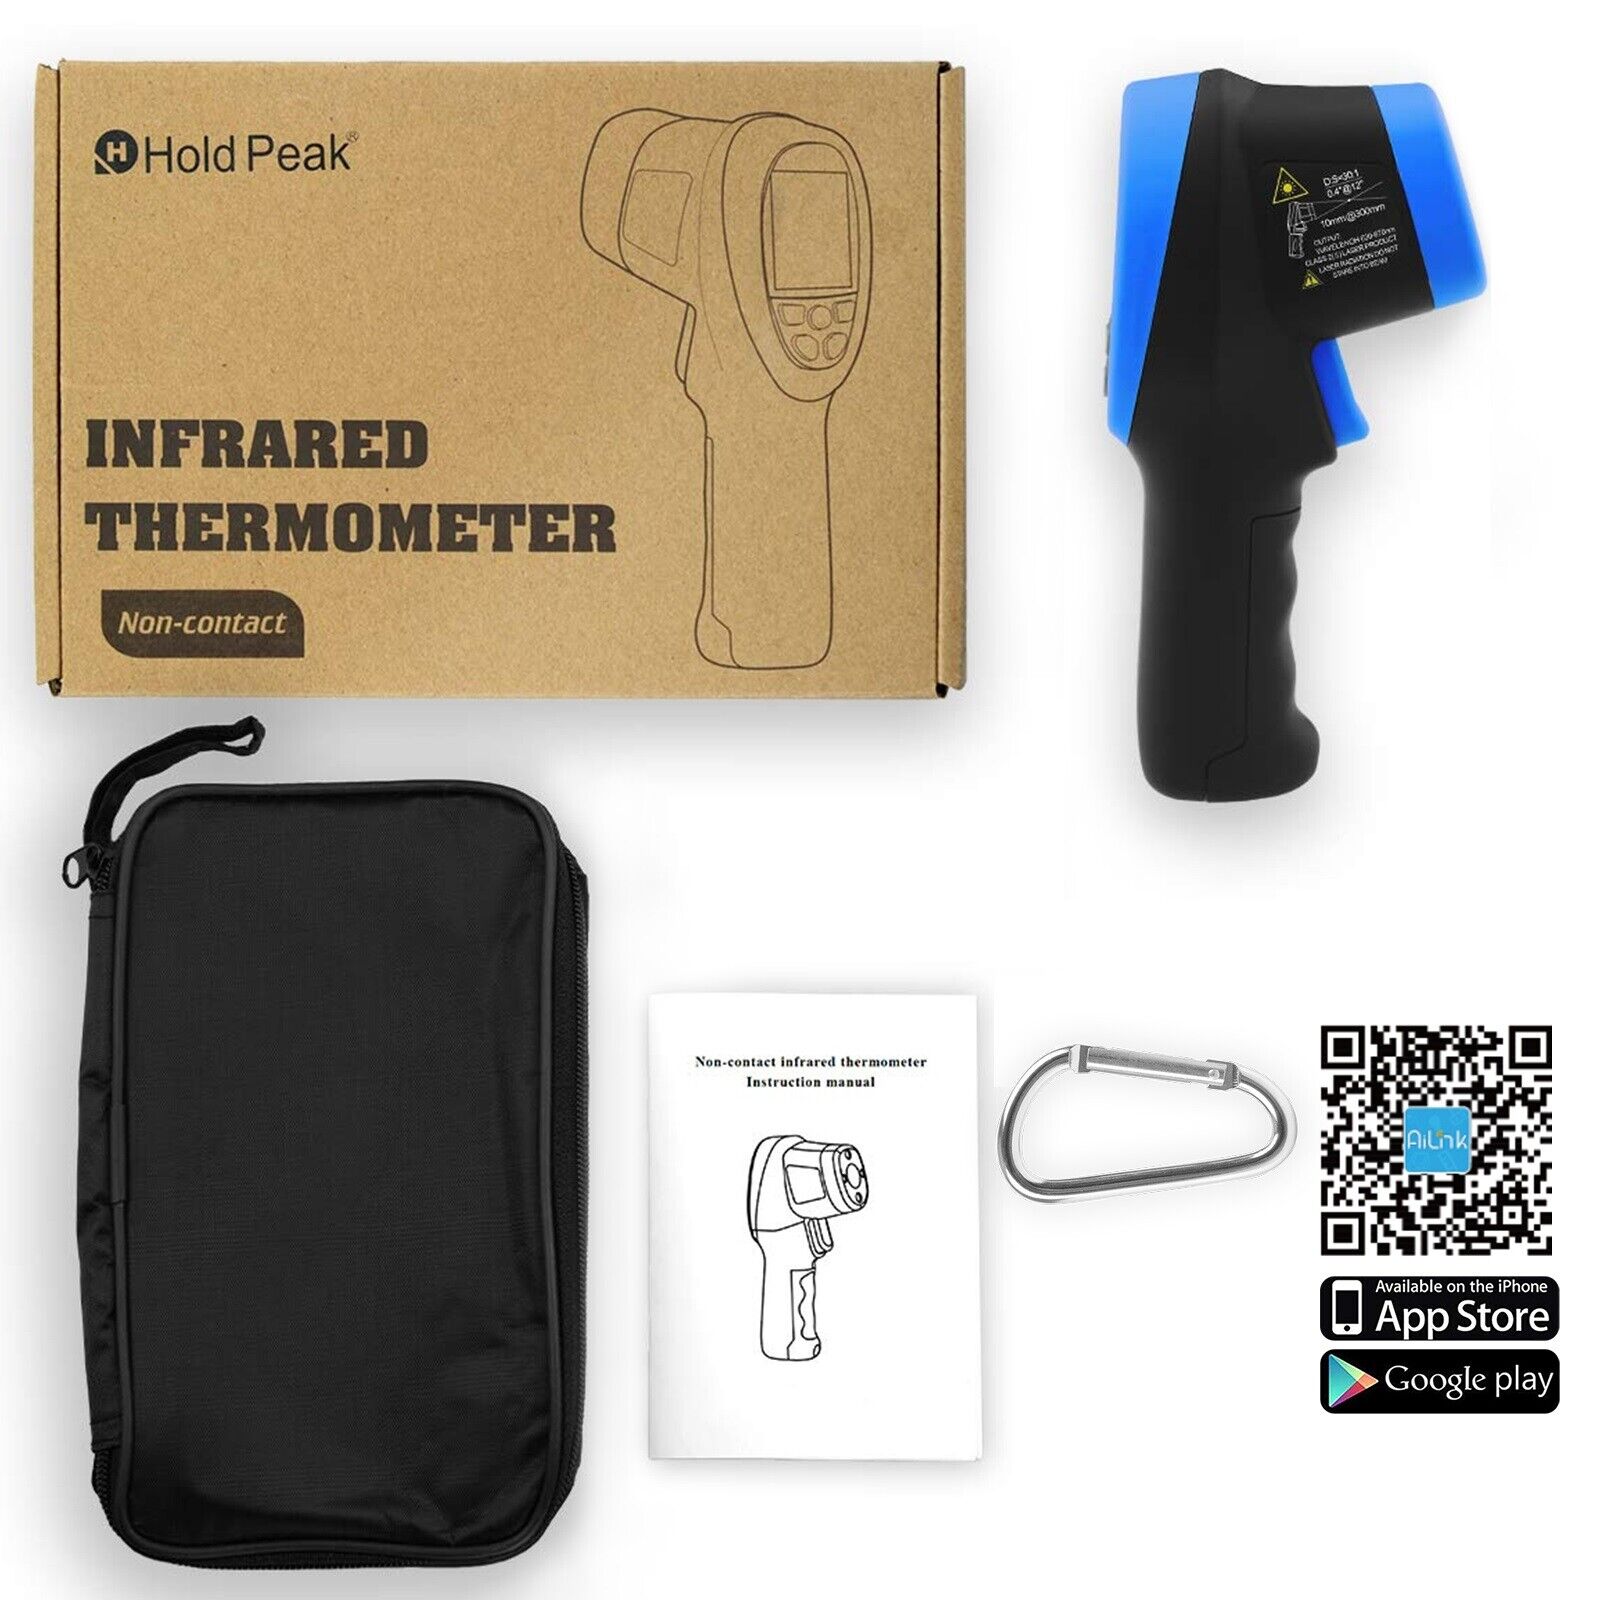 HP-1120 Digital Infrared Thermometer (HP-1120)